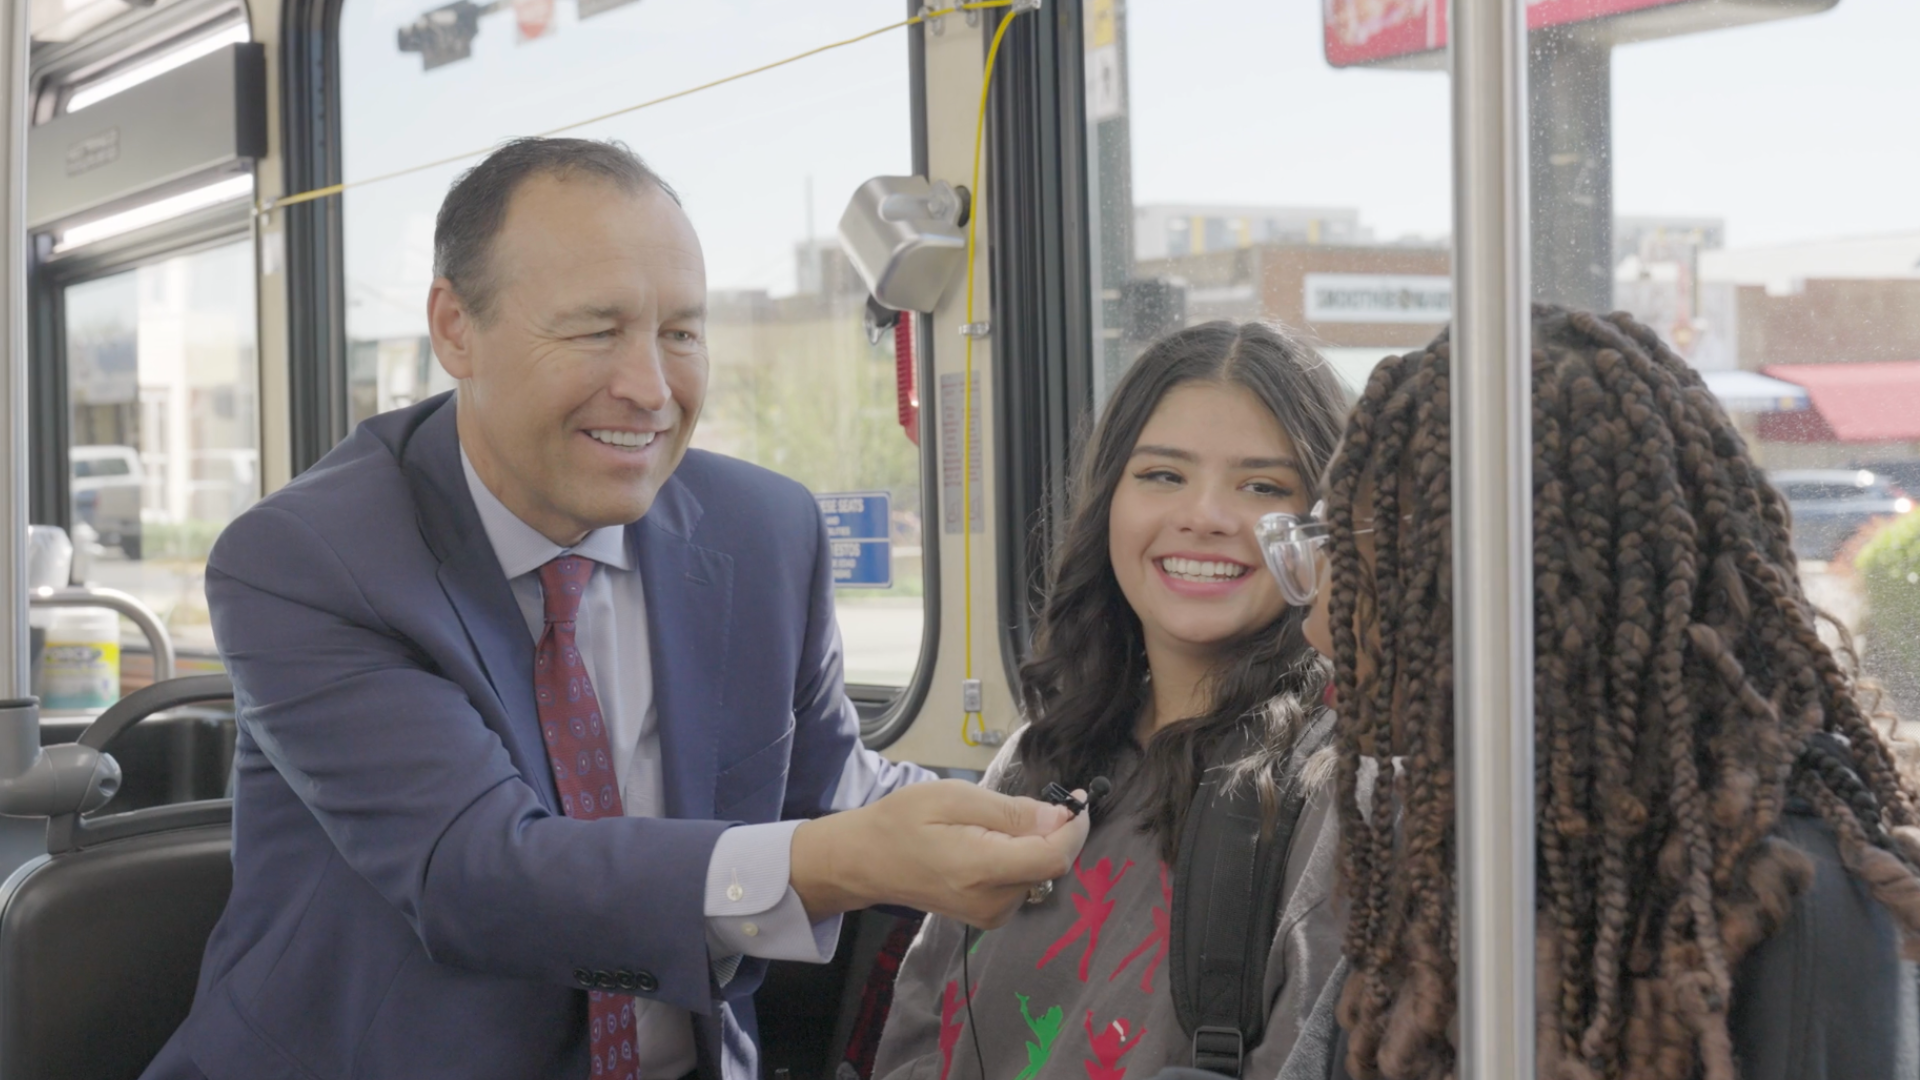 President Damphousse chats with TXST students on the bus